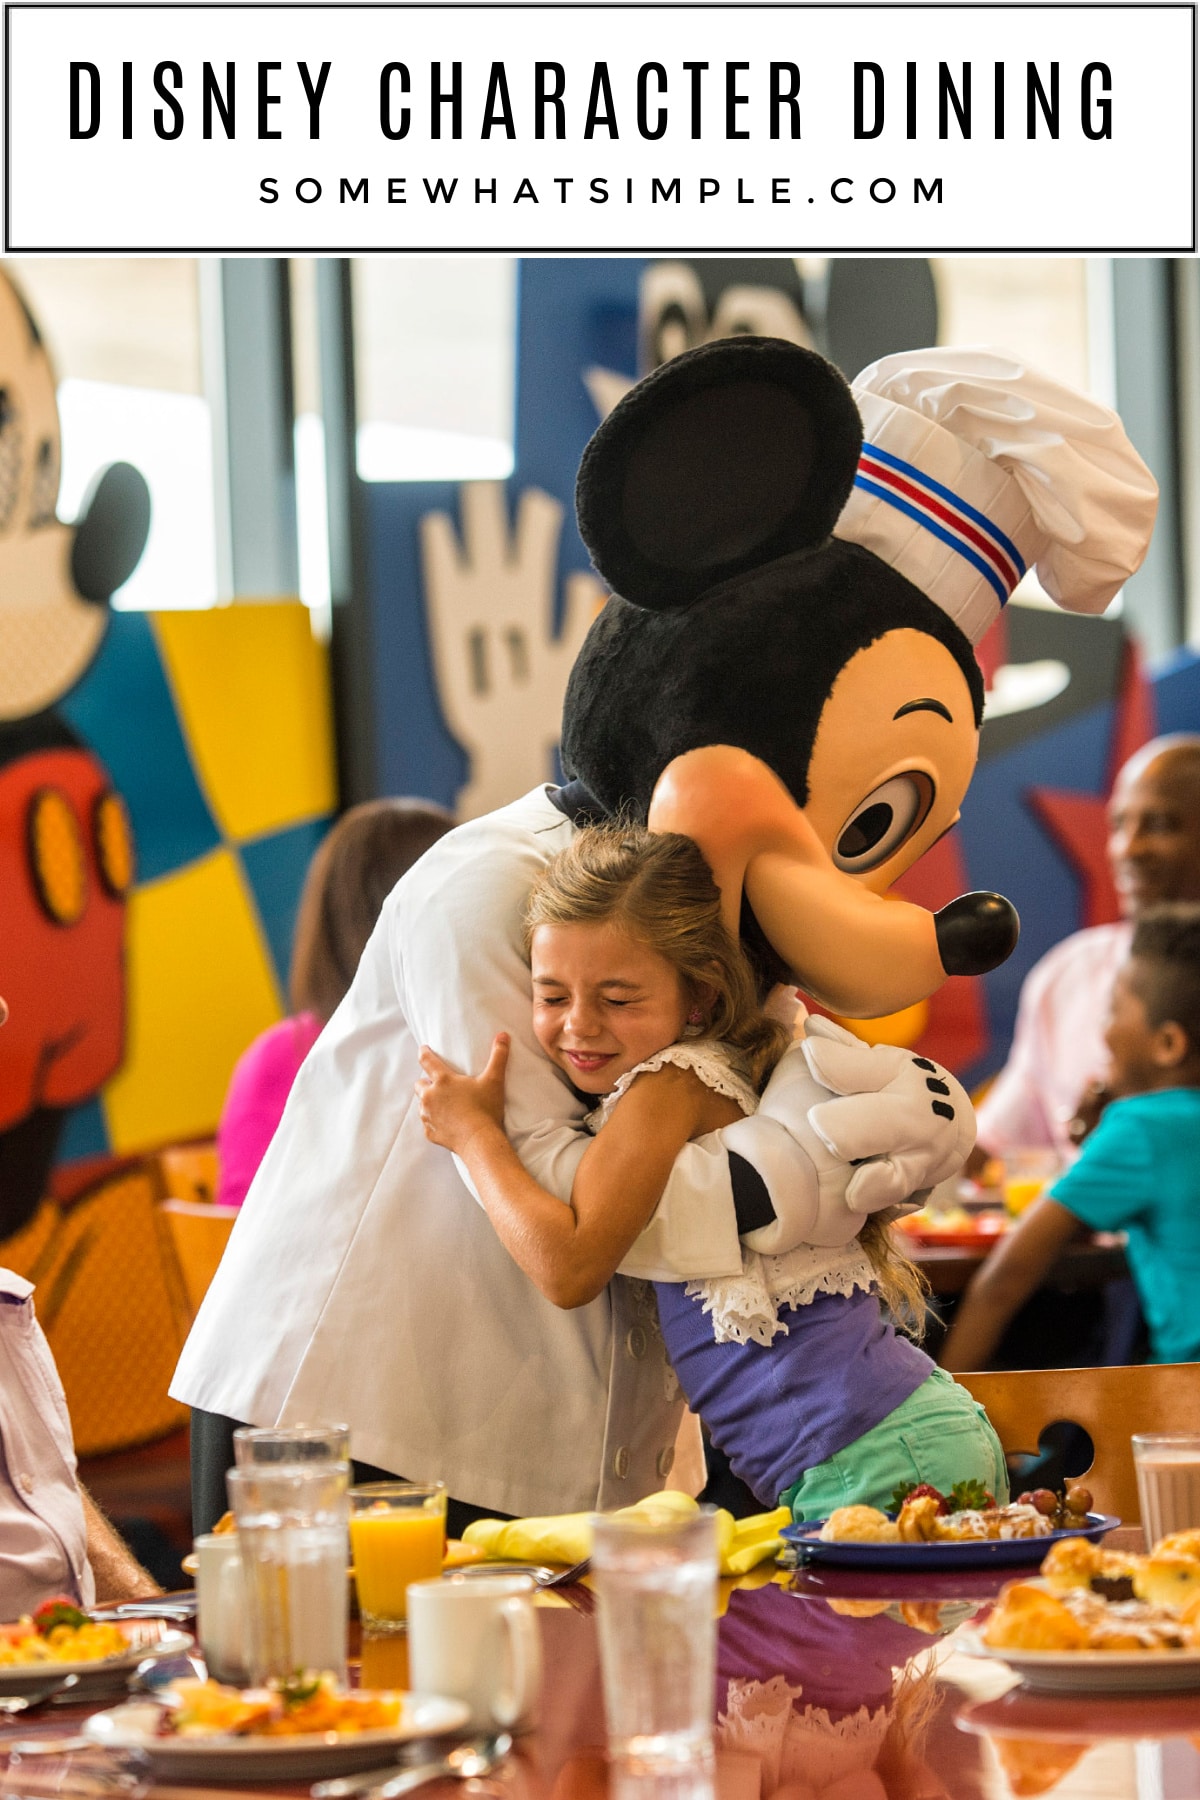 The food's tasty and the characters are fun, which makes Disney character dining some of the most popular attractions at Walt Disney World. But which character dining restaurants are the best? We rank them here. via @somewhatsimple